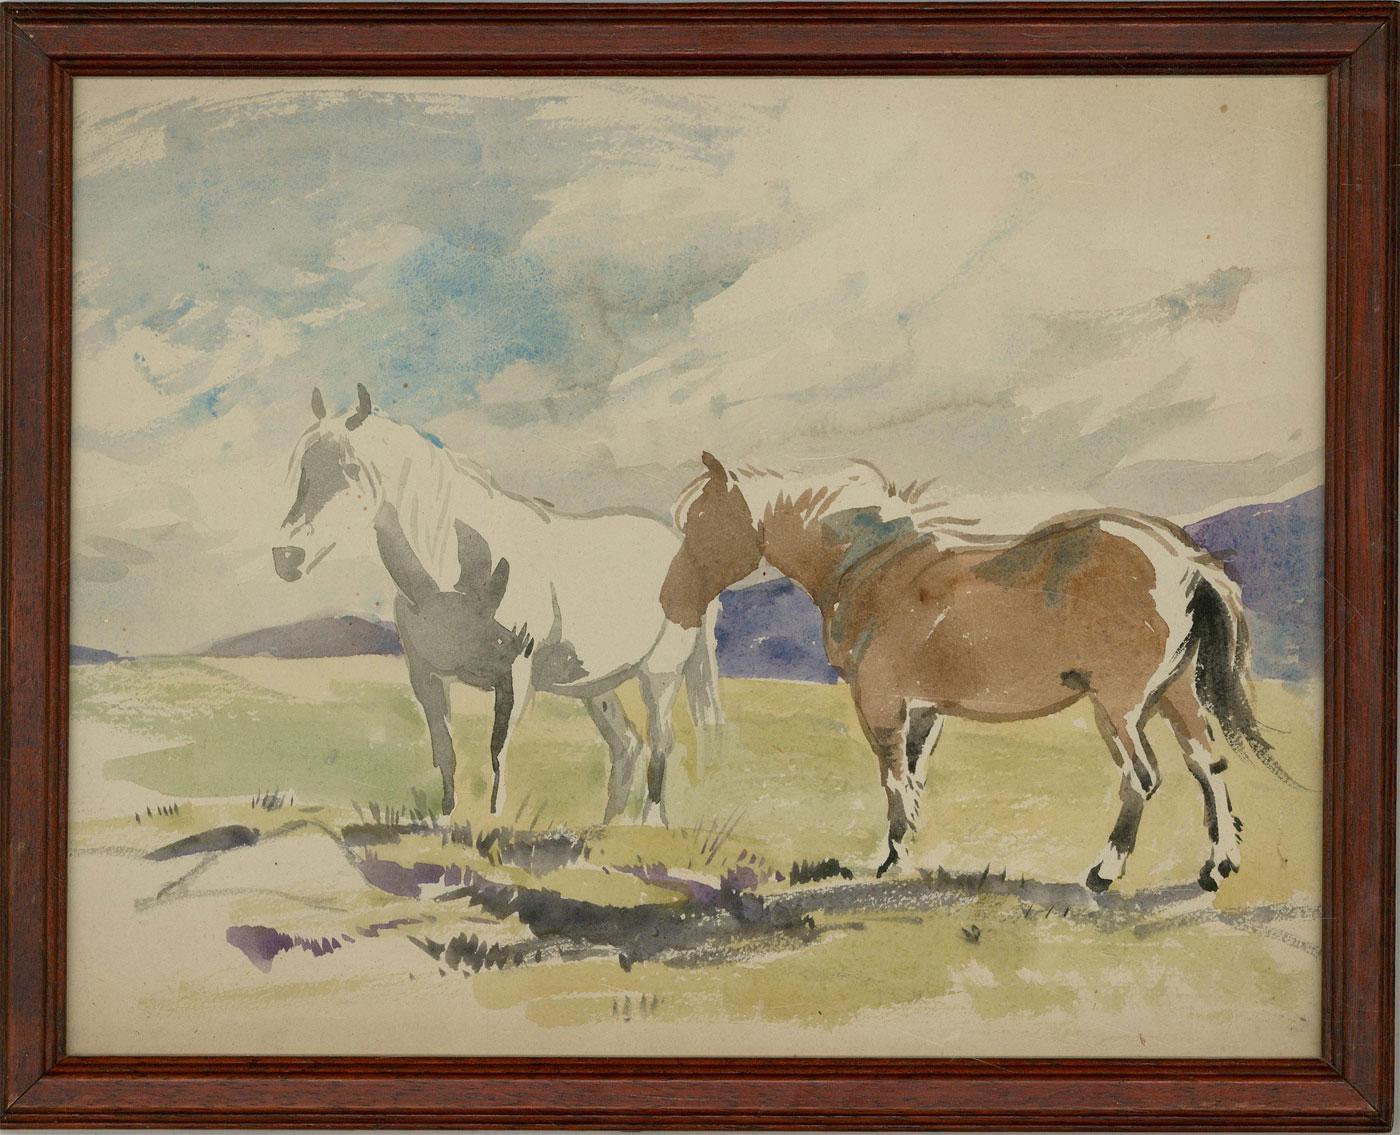 Attrib. John Murray Thomson (1885-1974) - Early 20th Century Watercolour, Horse - Brown Animal Art by Unknown